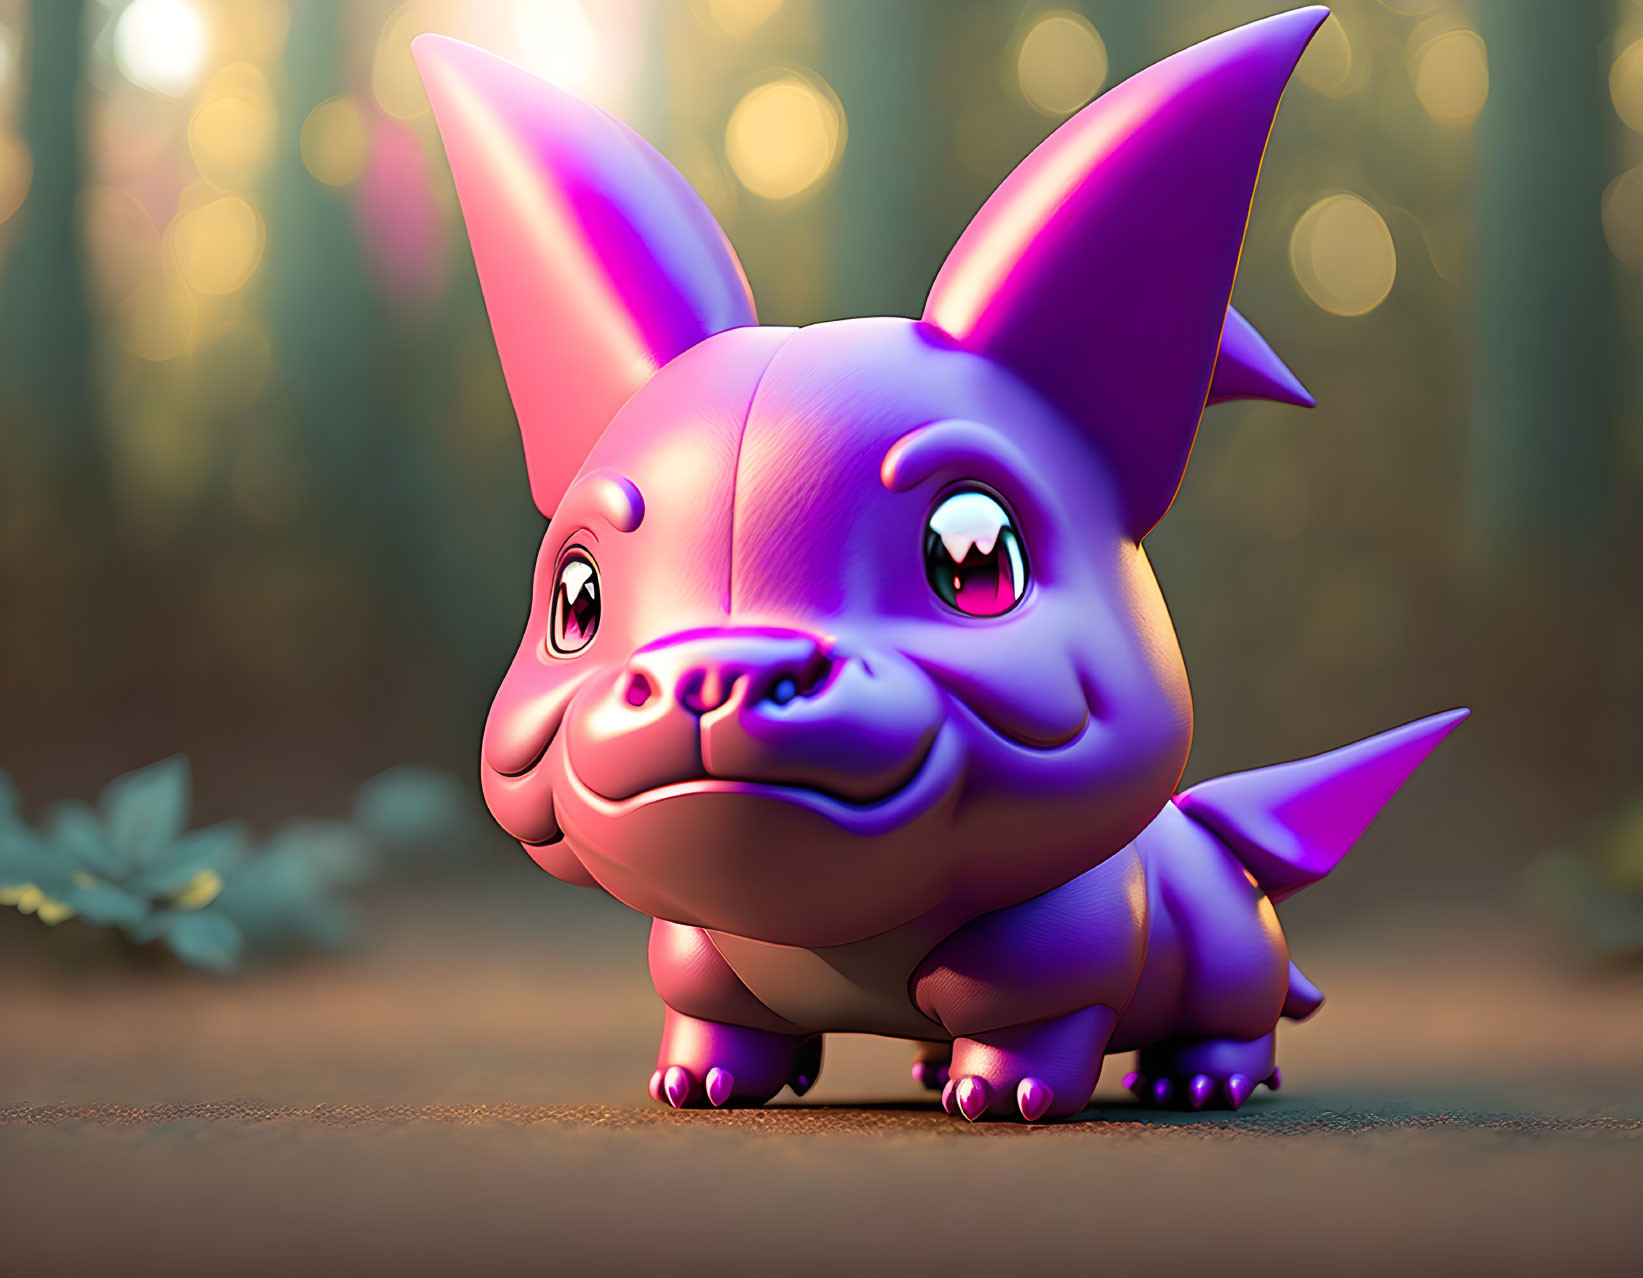 Colorful 3D illustration: Cute chubby creature in whimsical forest